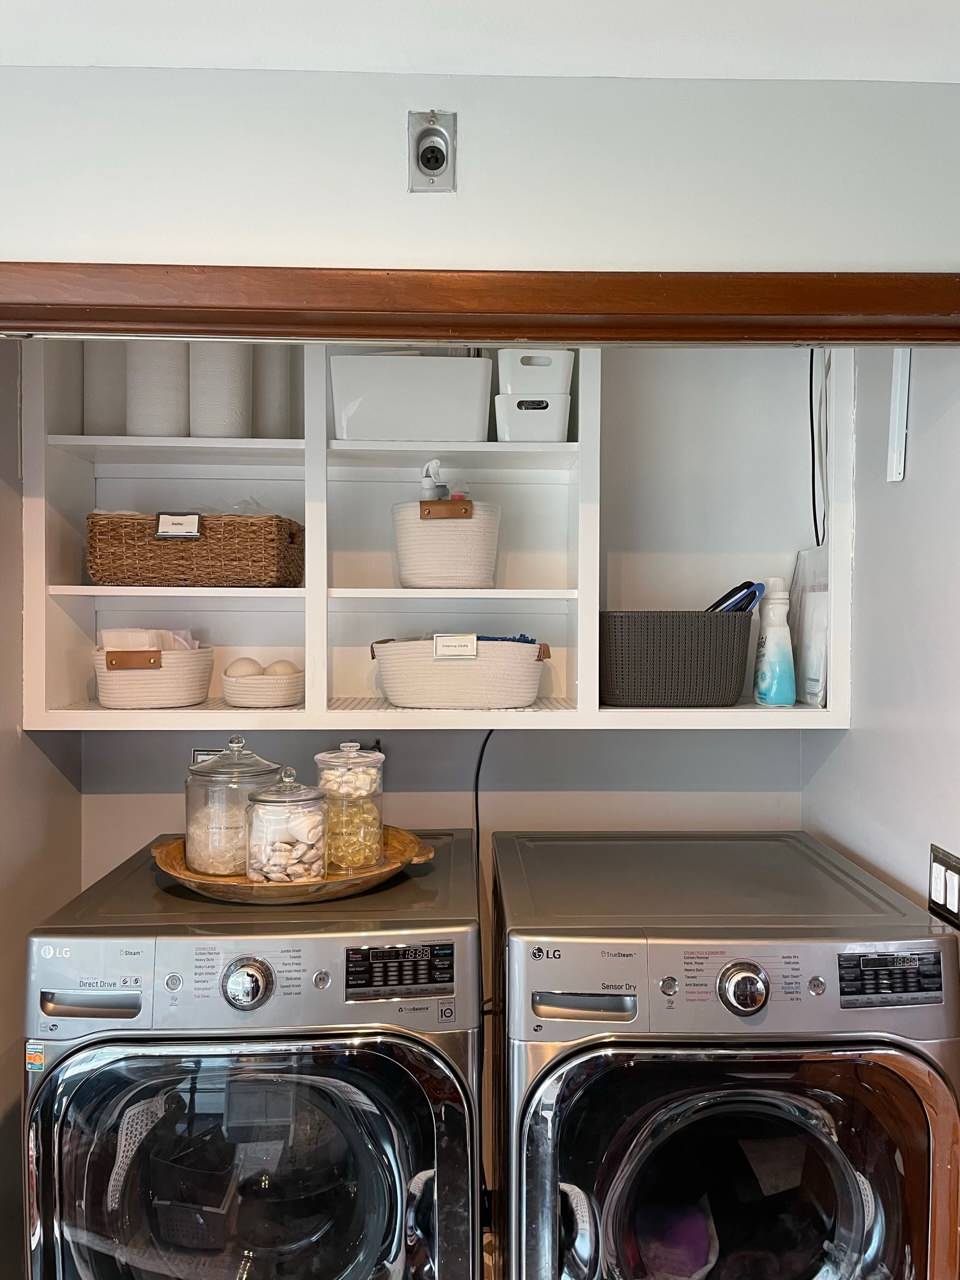 Example of a laundry room design